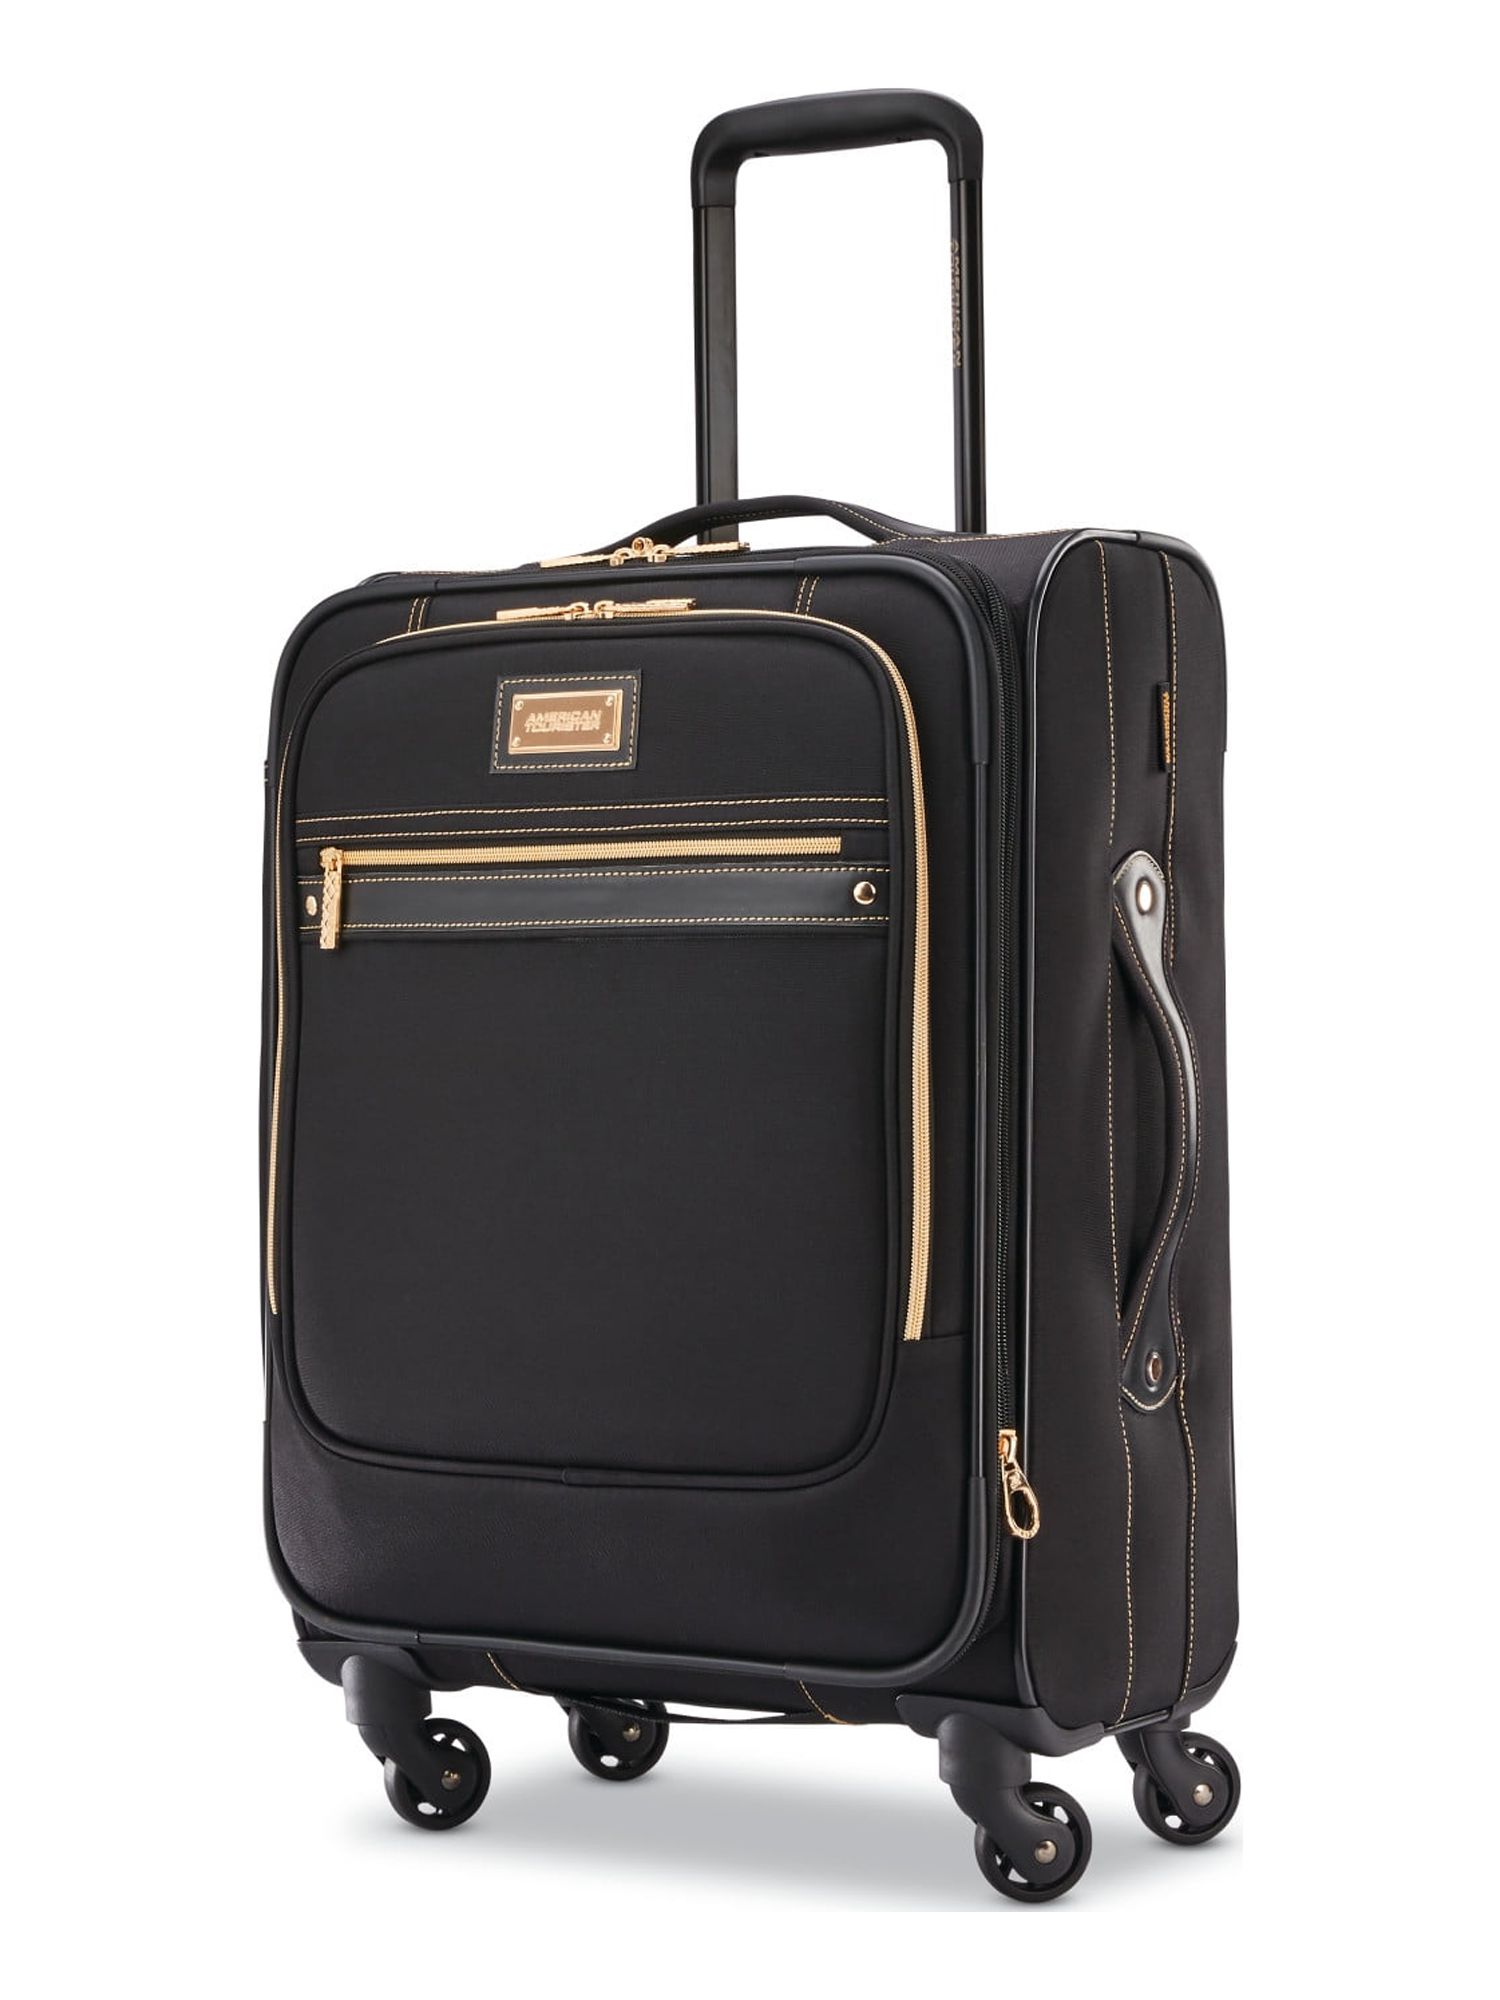 American Tourister Beau Monde 20" Softside Spinner Luggage - image 1 of 8